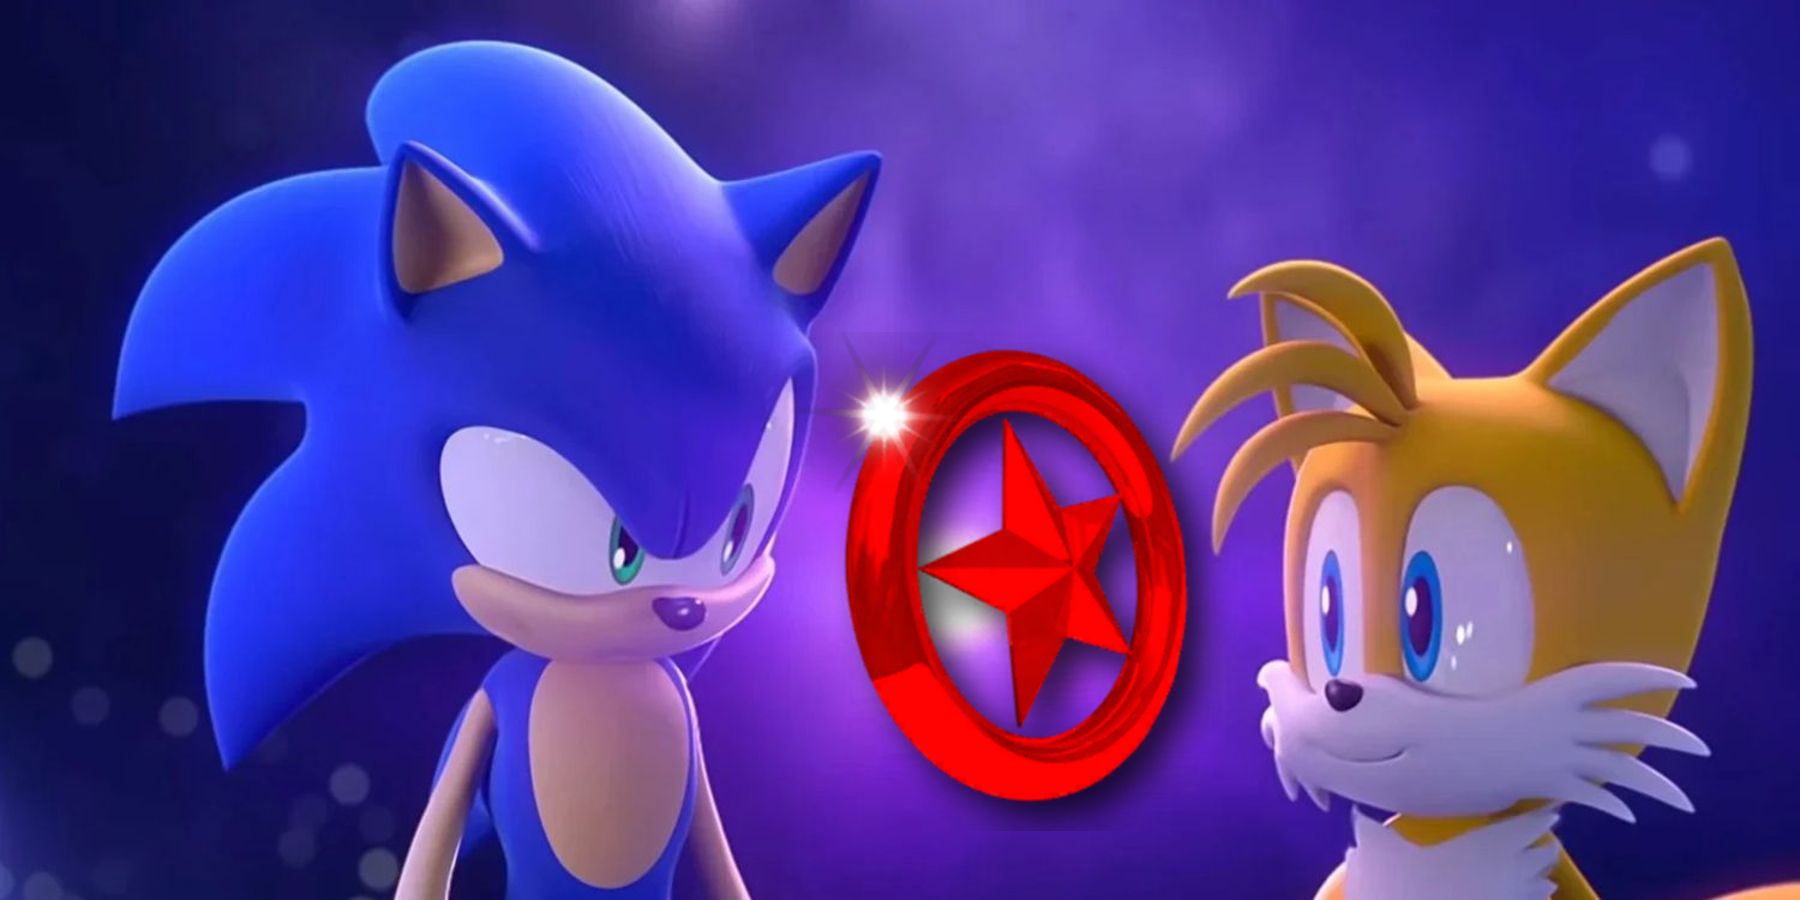 sonic colors stages